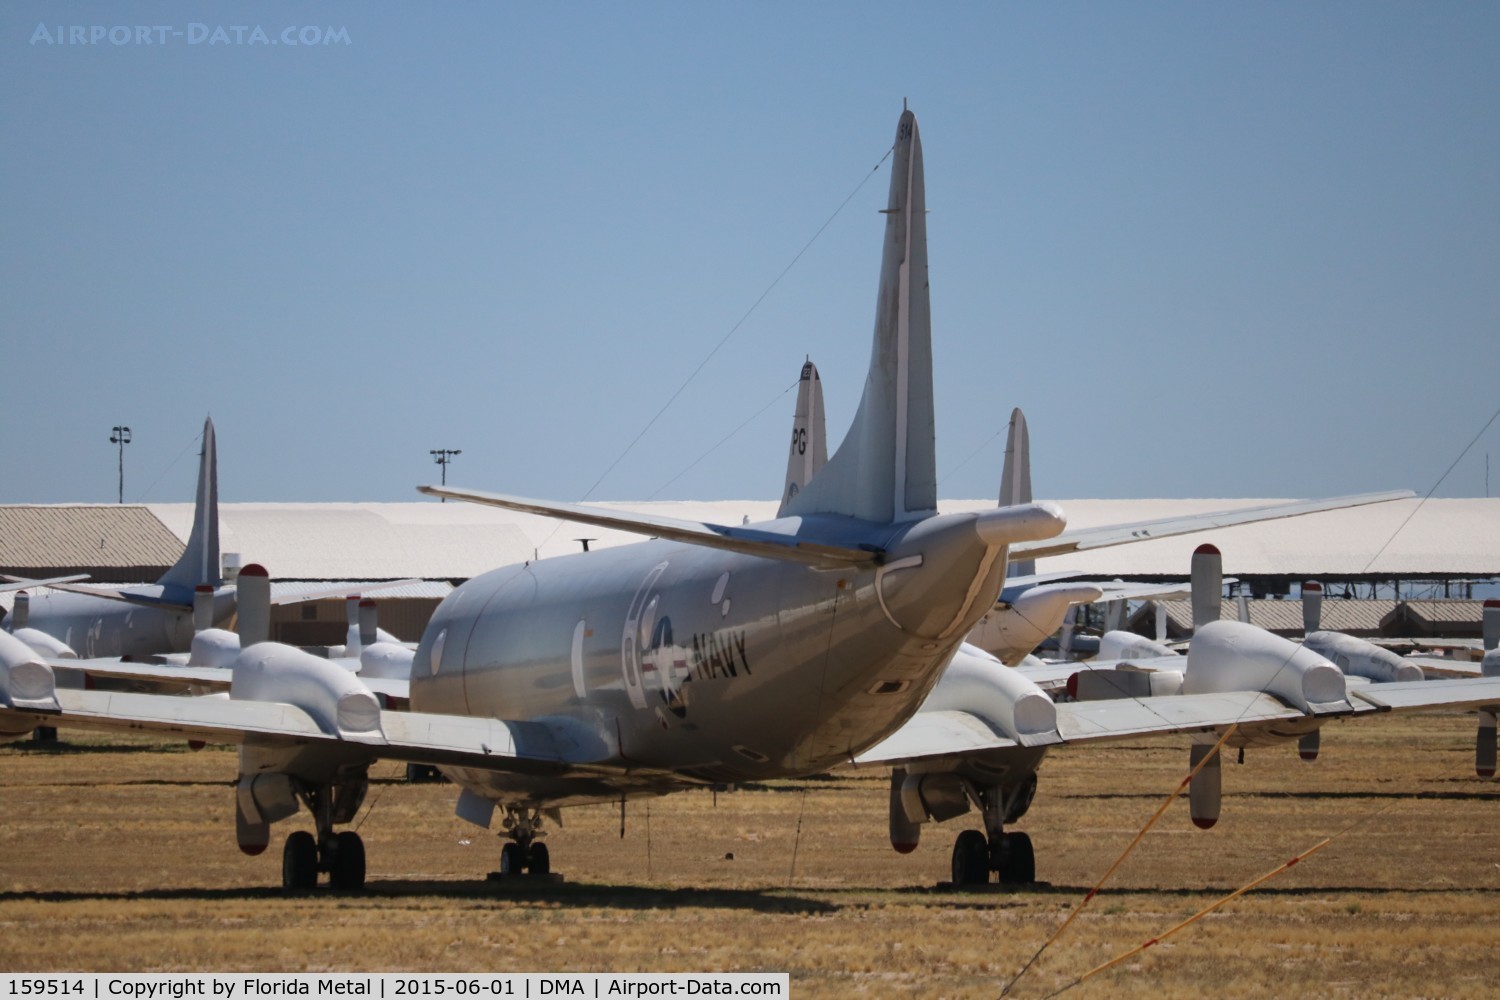 159514, Lockheed P-3C Orion C/N 285A-5632, P-3C Orion